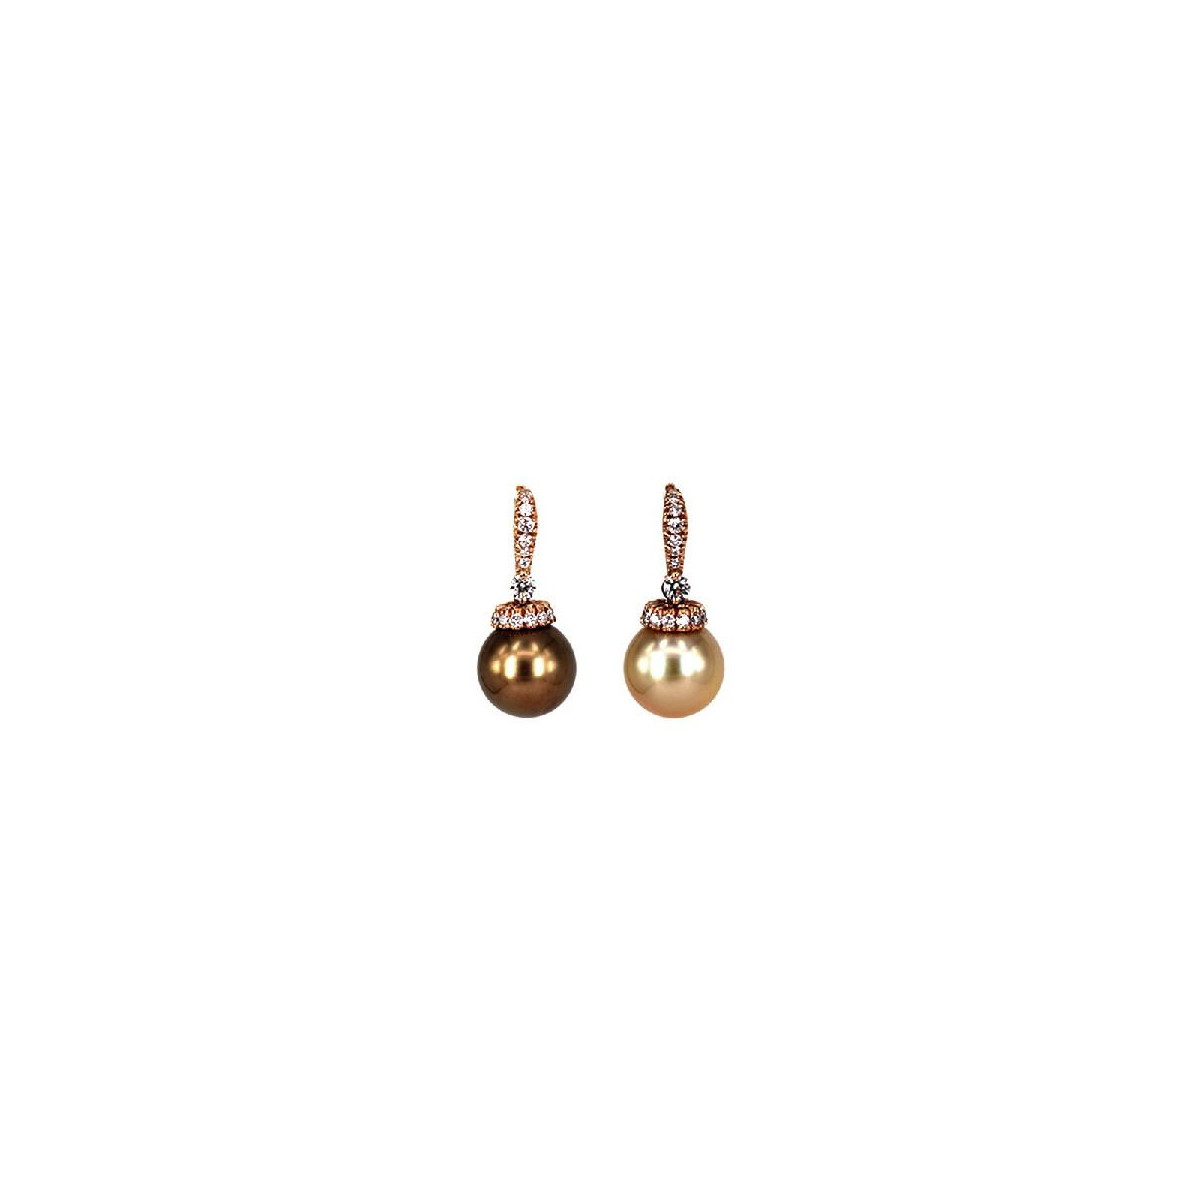 EARRINGS, BRILLIANT PEARLS CHOCOLATE & GOLD